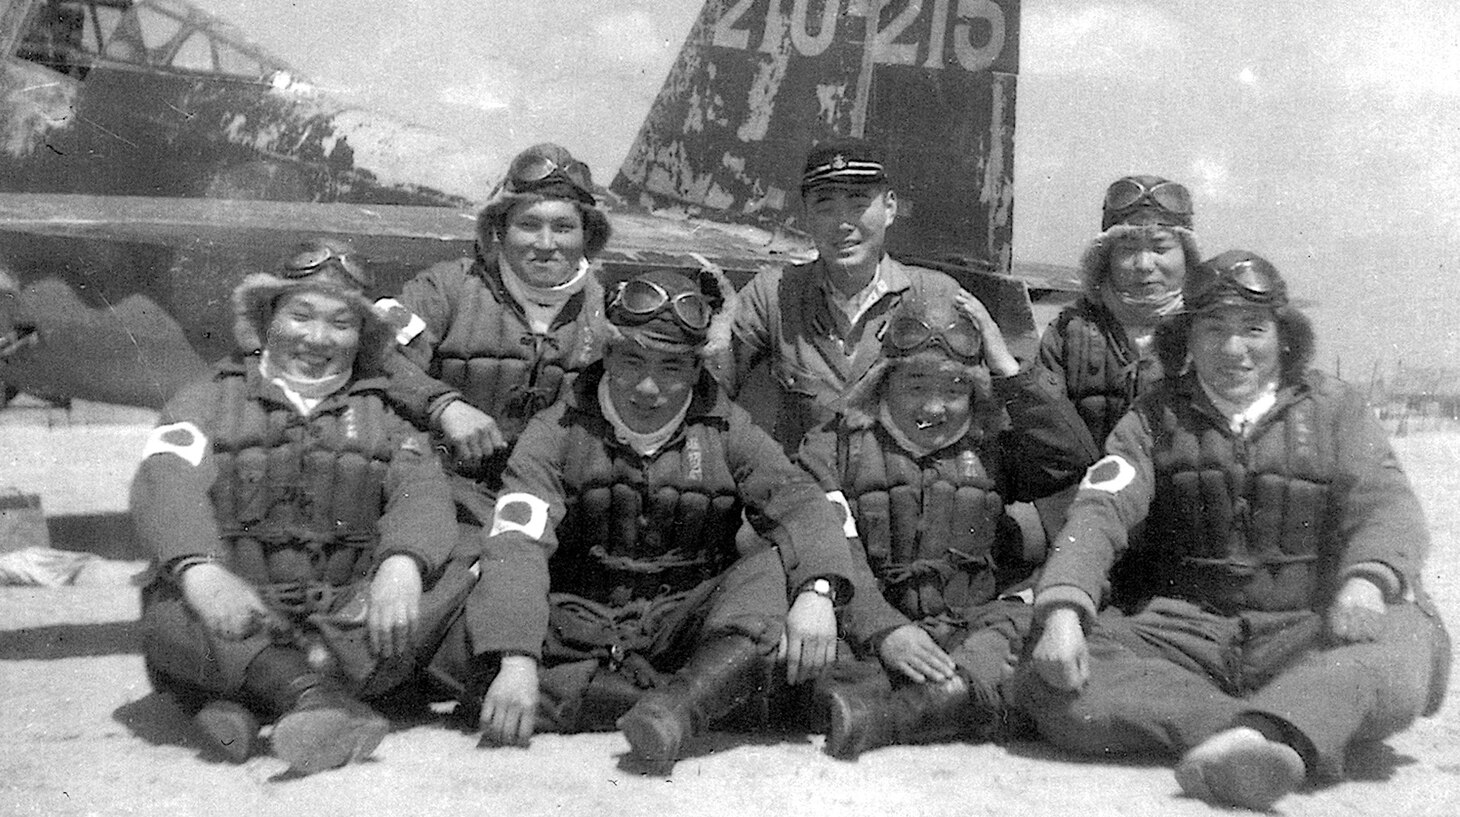 Looking like any young aircrewmen, these members of the Specialist Reserve Students class in March 1945 pose in their flight gear beside their weathered D4Y3. Of these six men, four were killed in action off Okinawa. (Photo courtesy of Tony Holmes Collection)